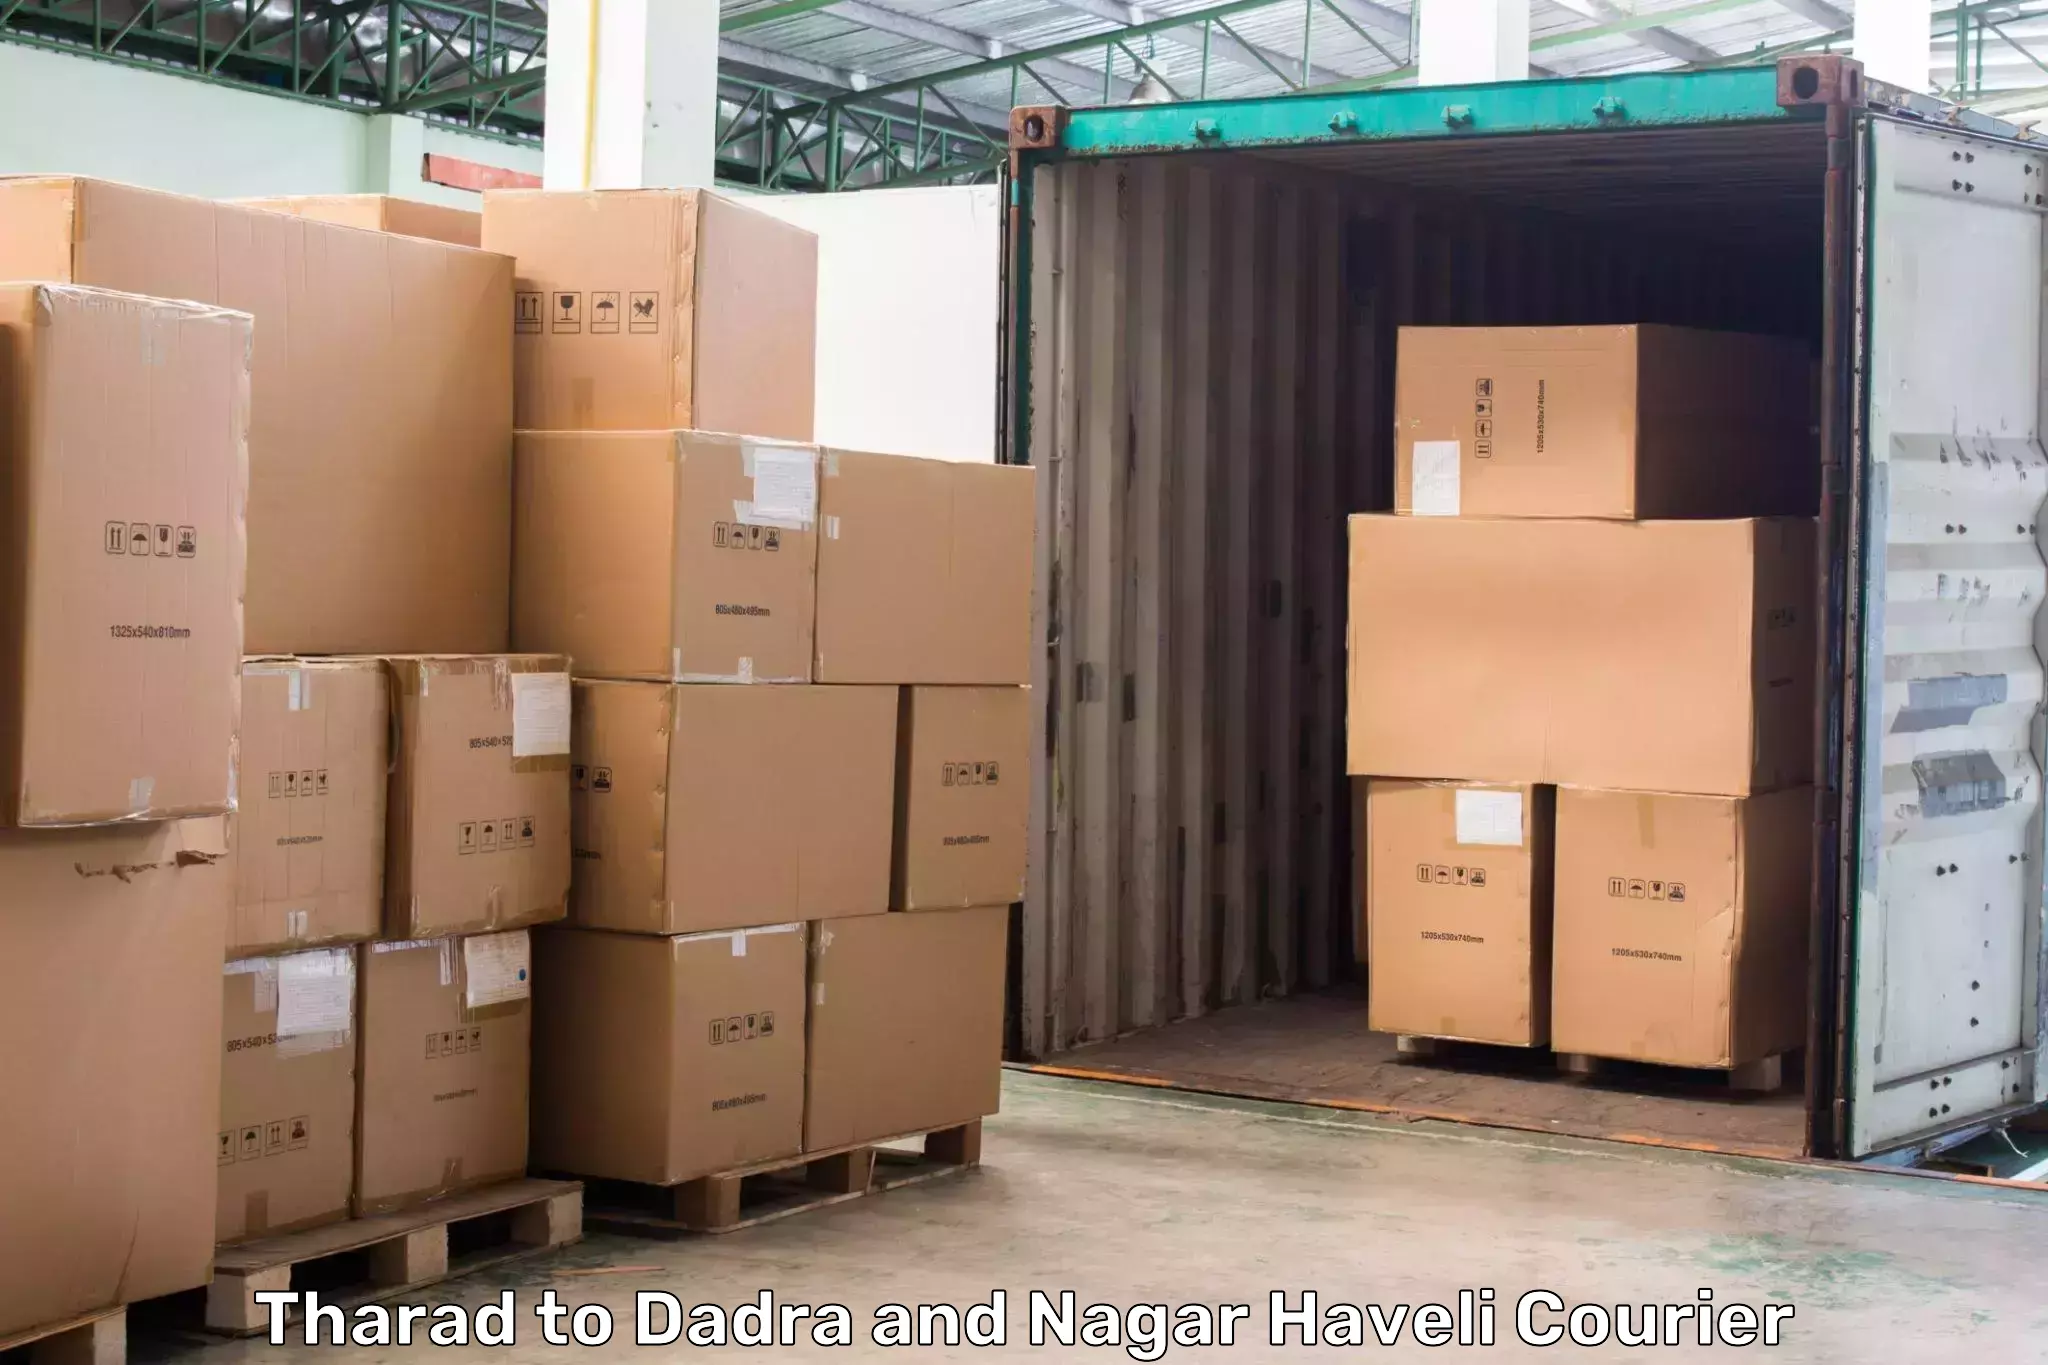 State-of-the-art courier technology Tharad to Dadra and Nagar Haveli